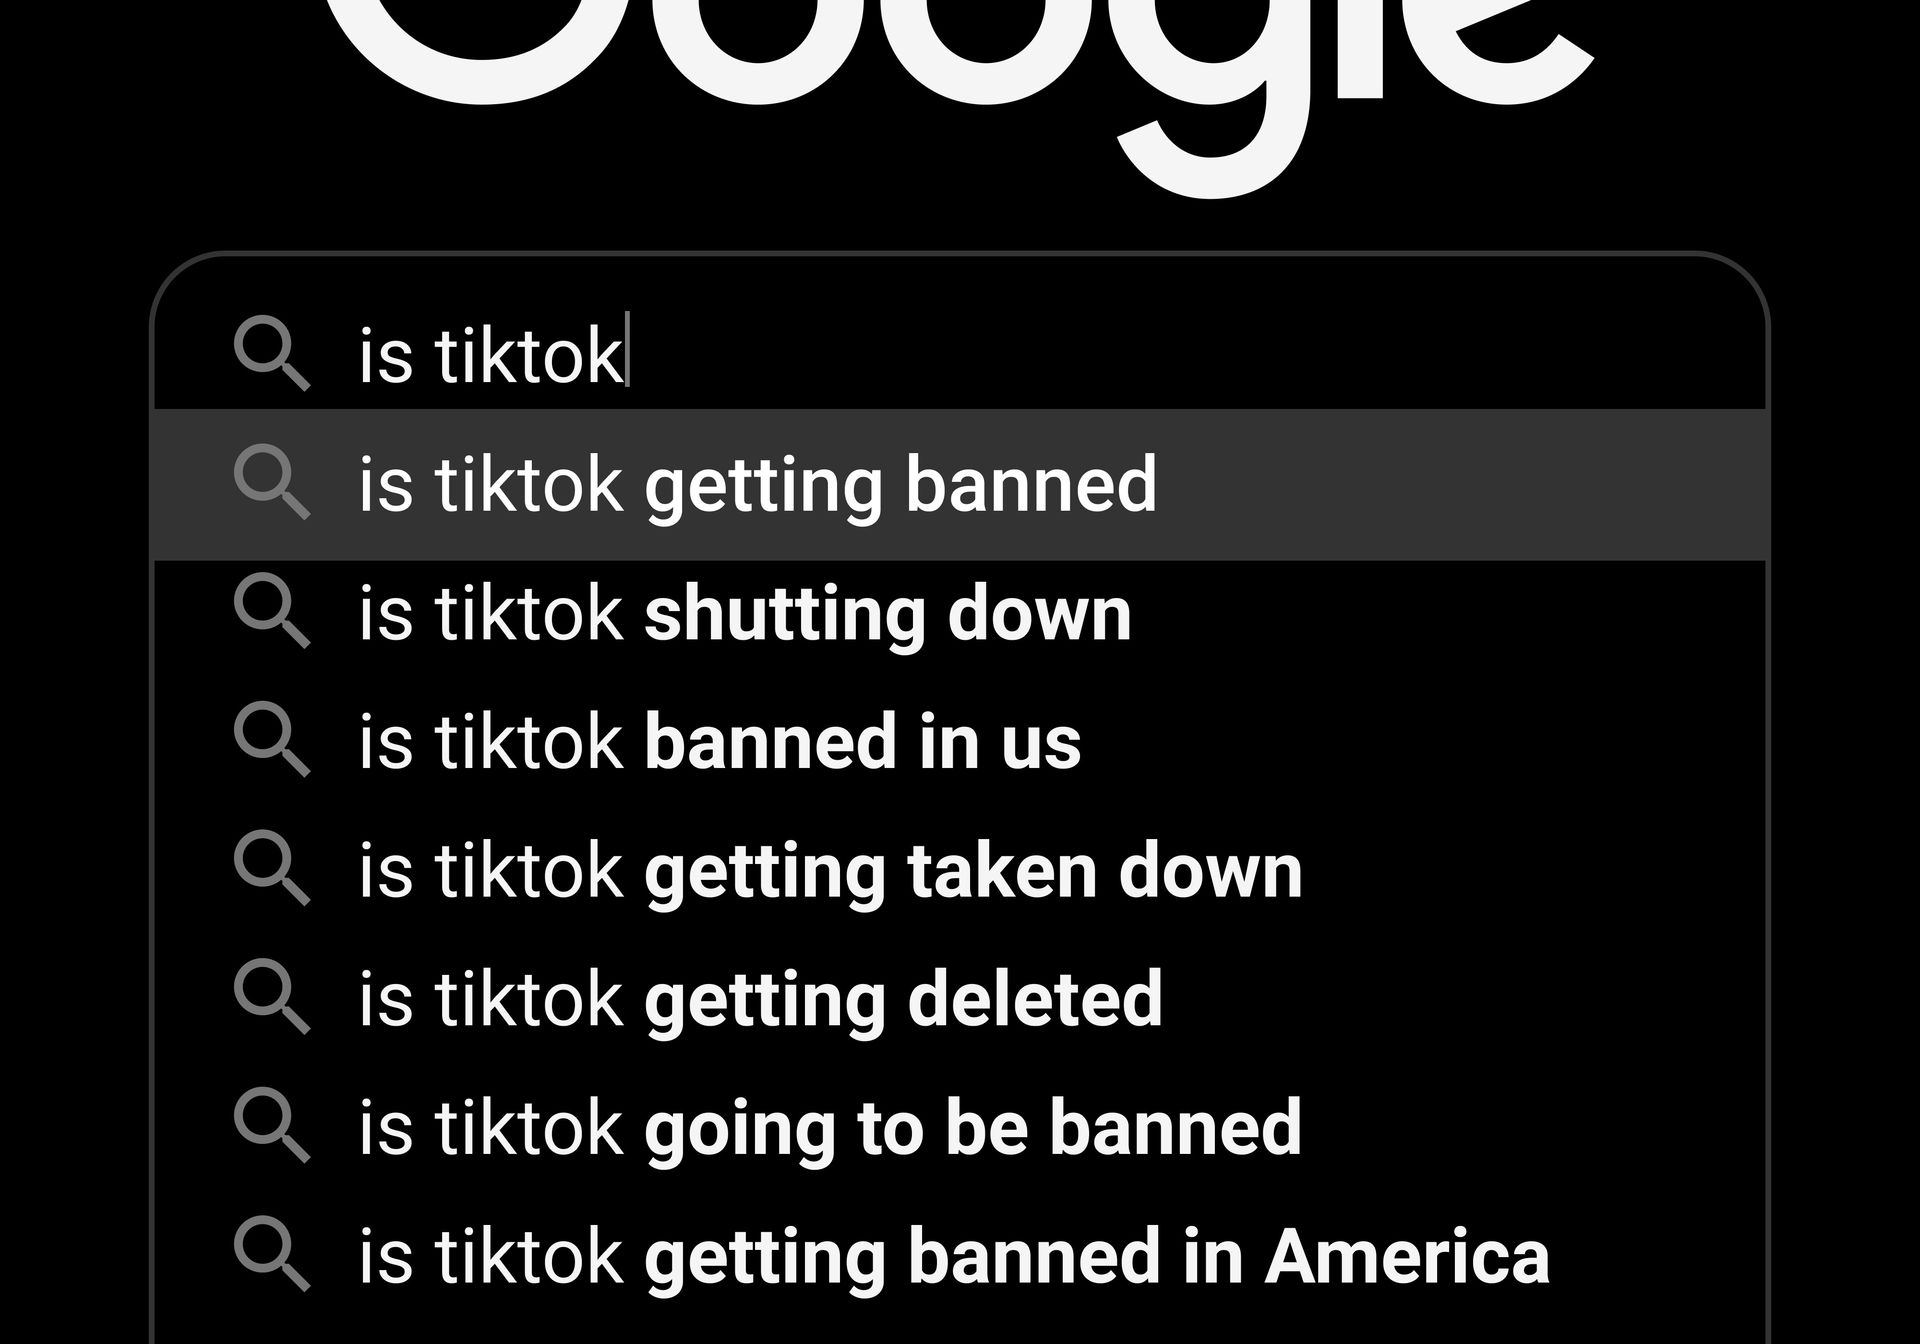 Future questions: Is TikTok banned or sold?